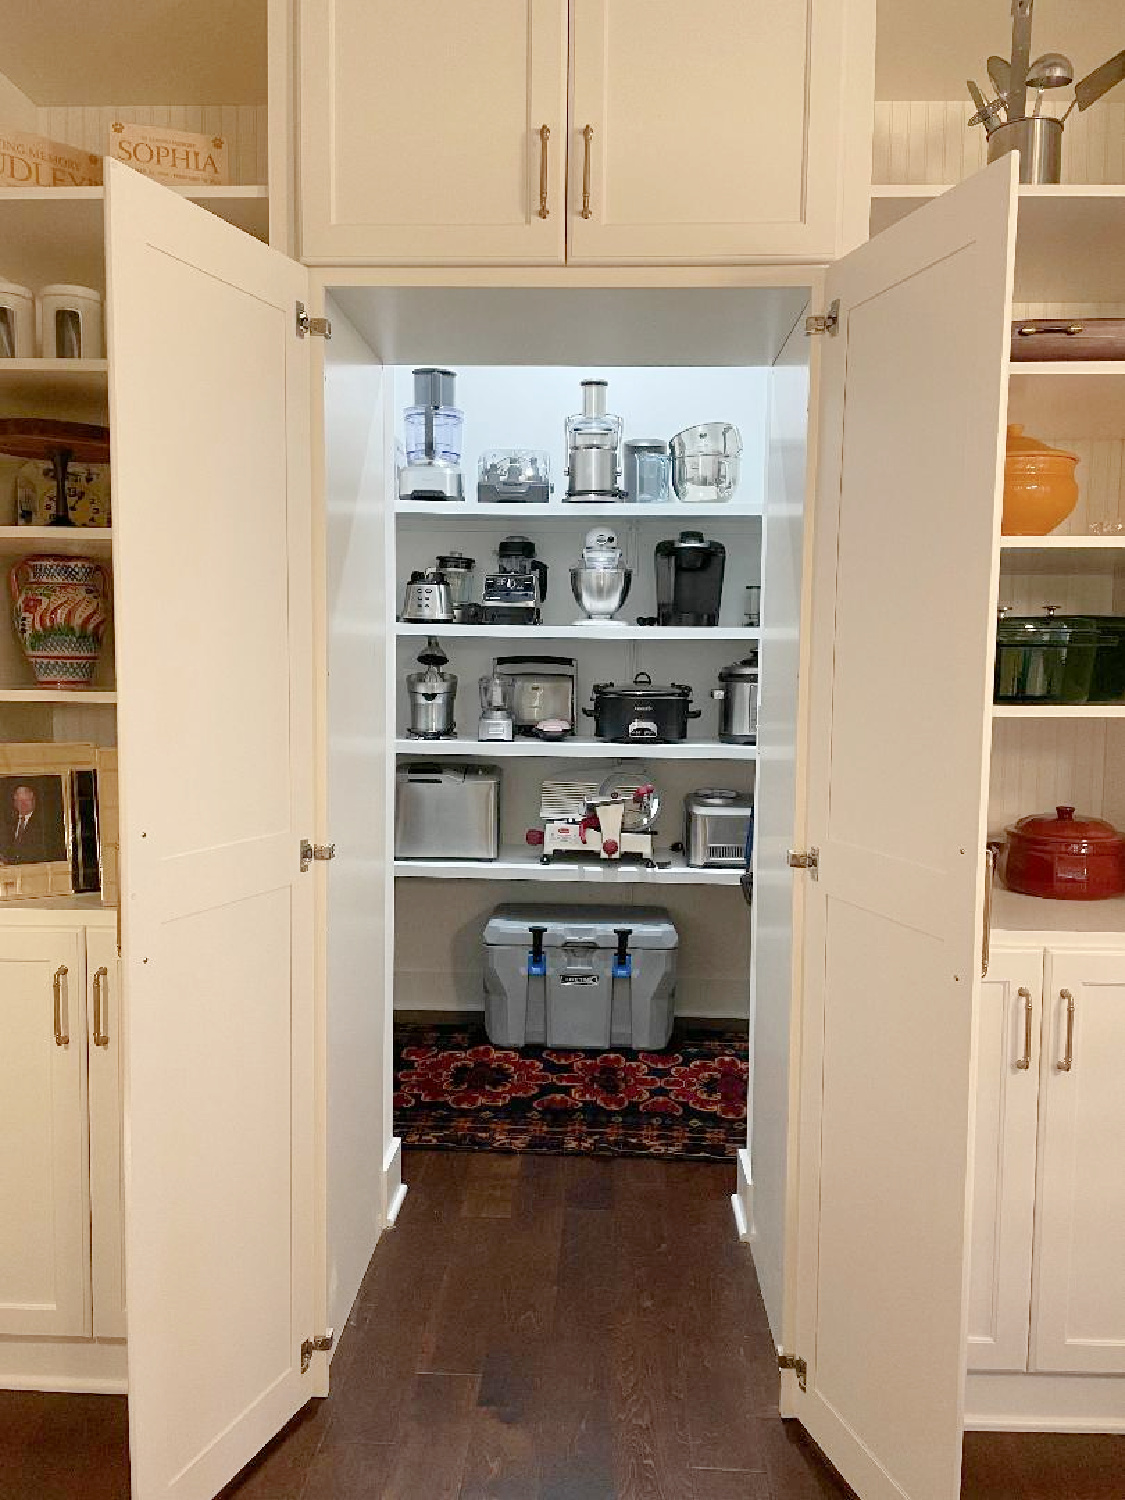 Hidden walk-in pantry in a beautiful timeless French kitchen design - Hello Lovely Studio. #kitchenpantry #hiddenpantry